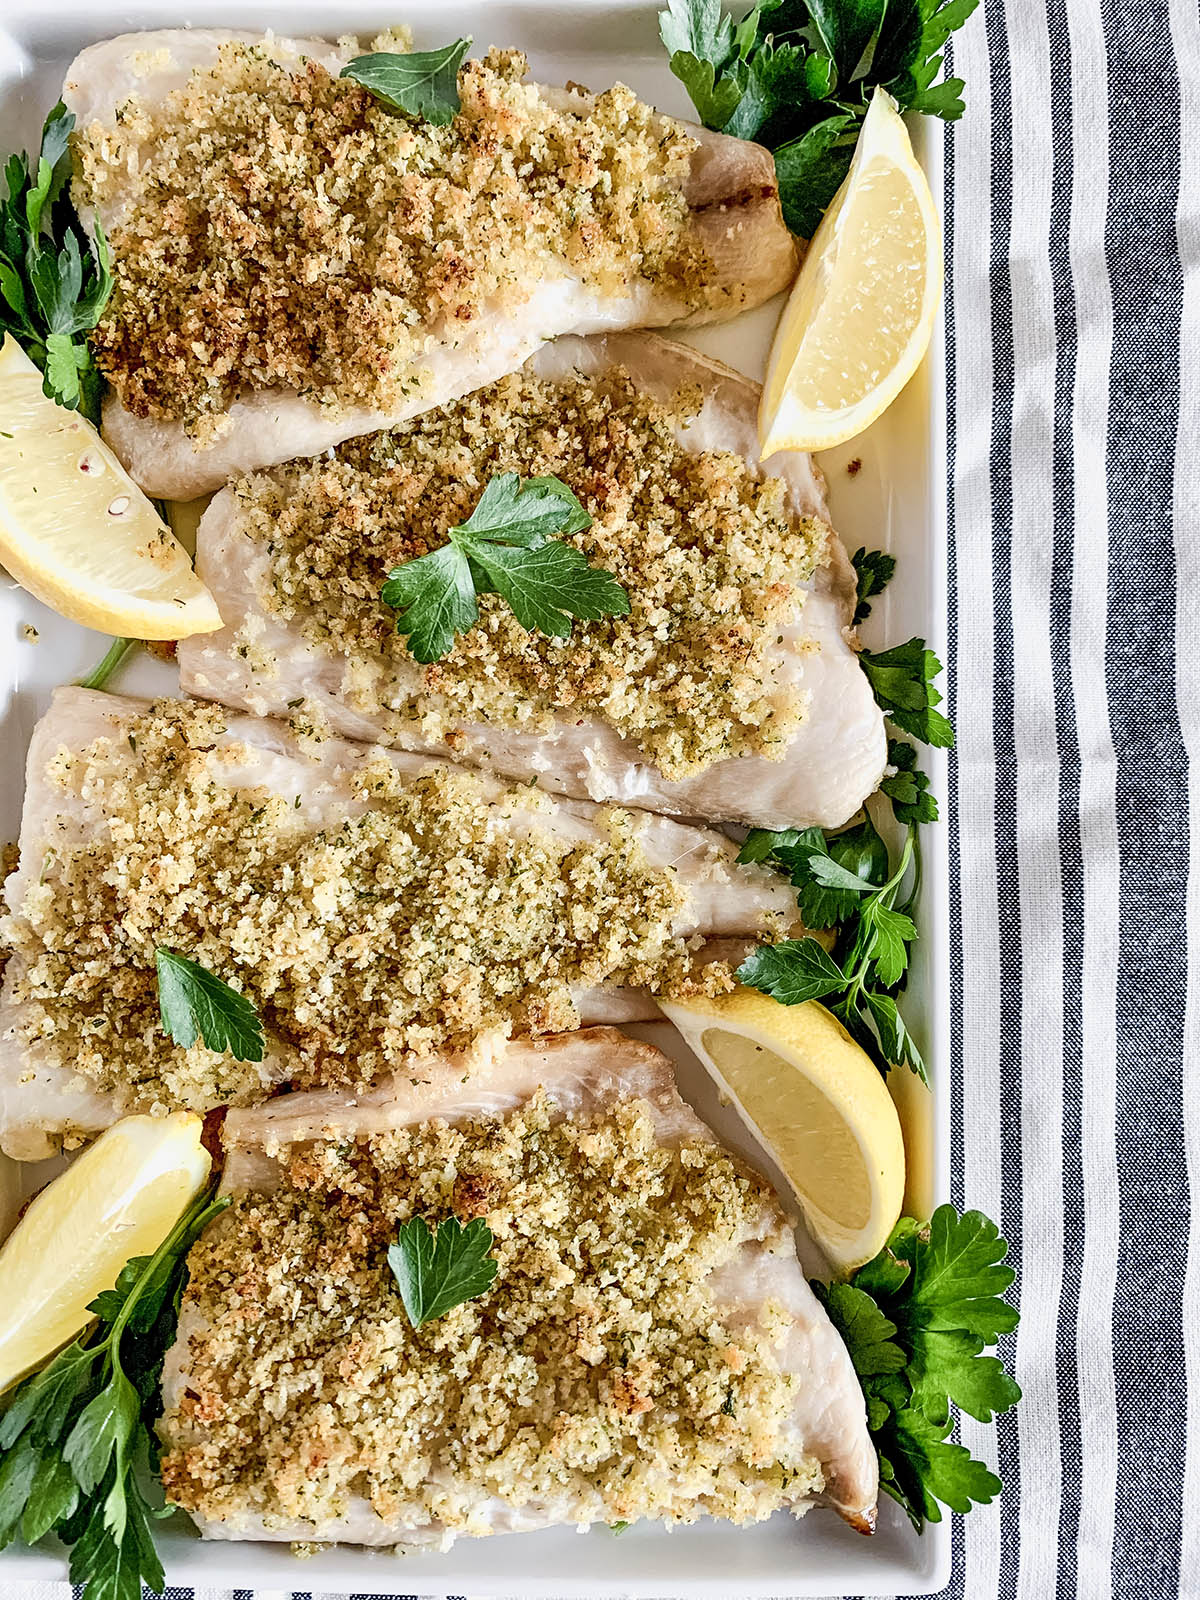 Overhead image of a platter of baked Panko-crusted white fish with parsley and lemon on a striped tablecloth.